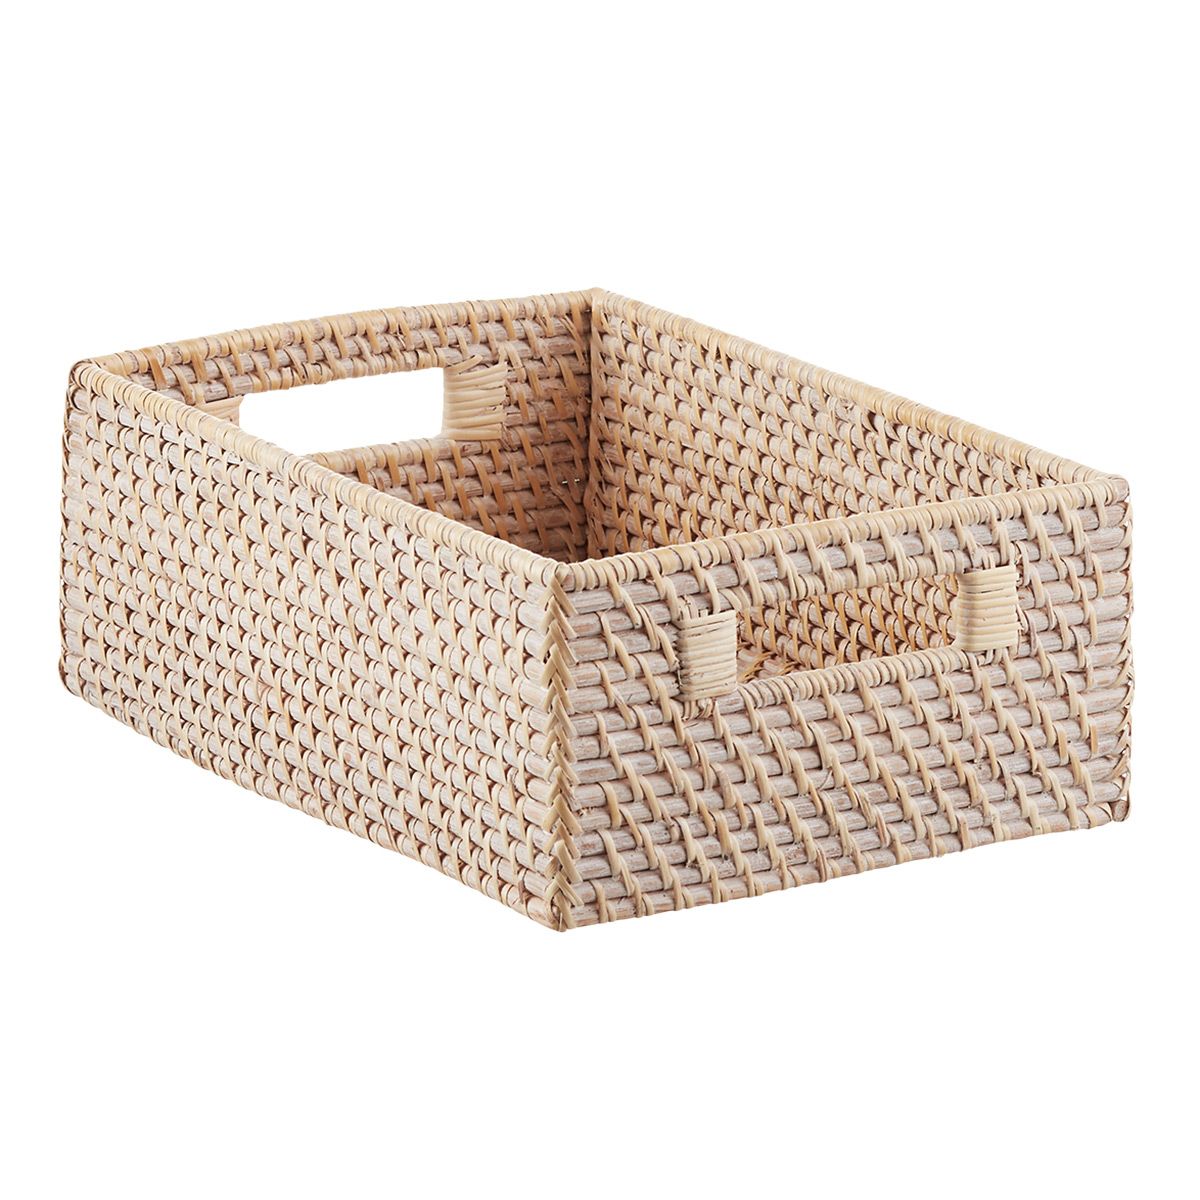 Rattan Bin w/ Handles | The Container Store